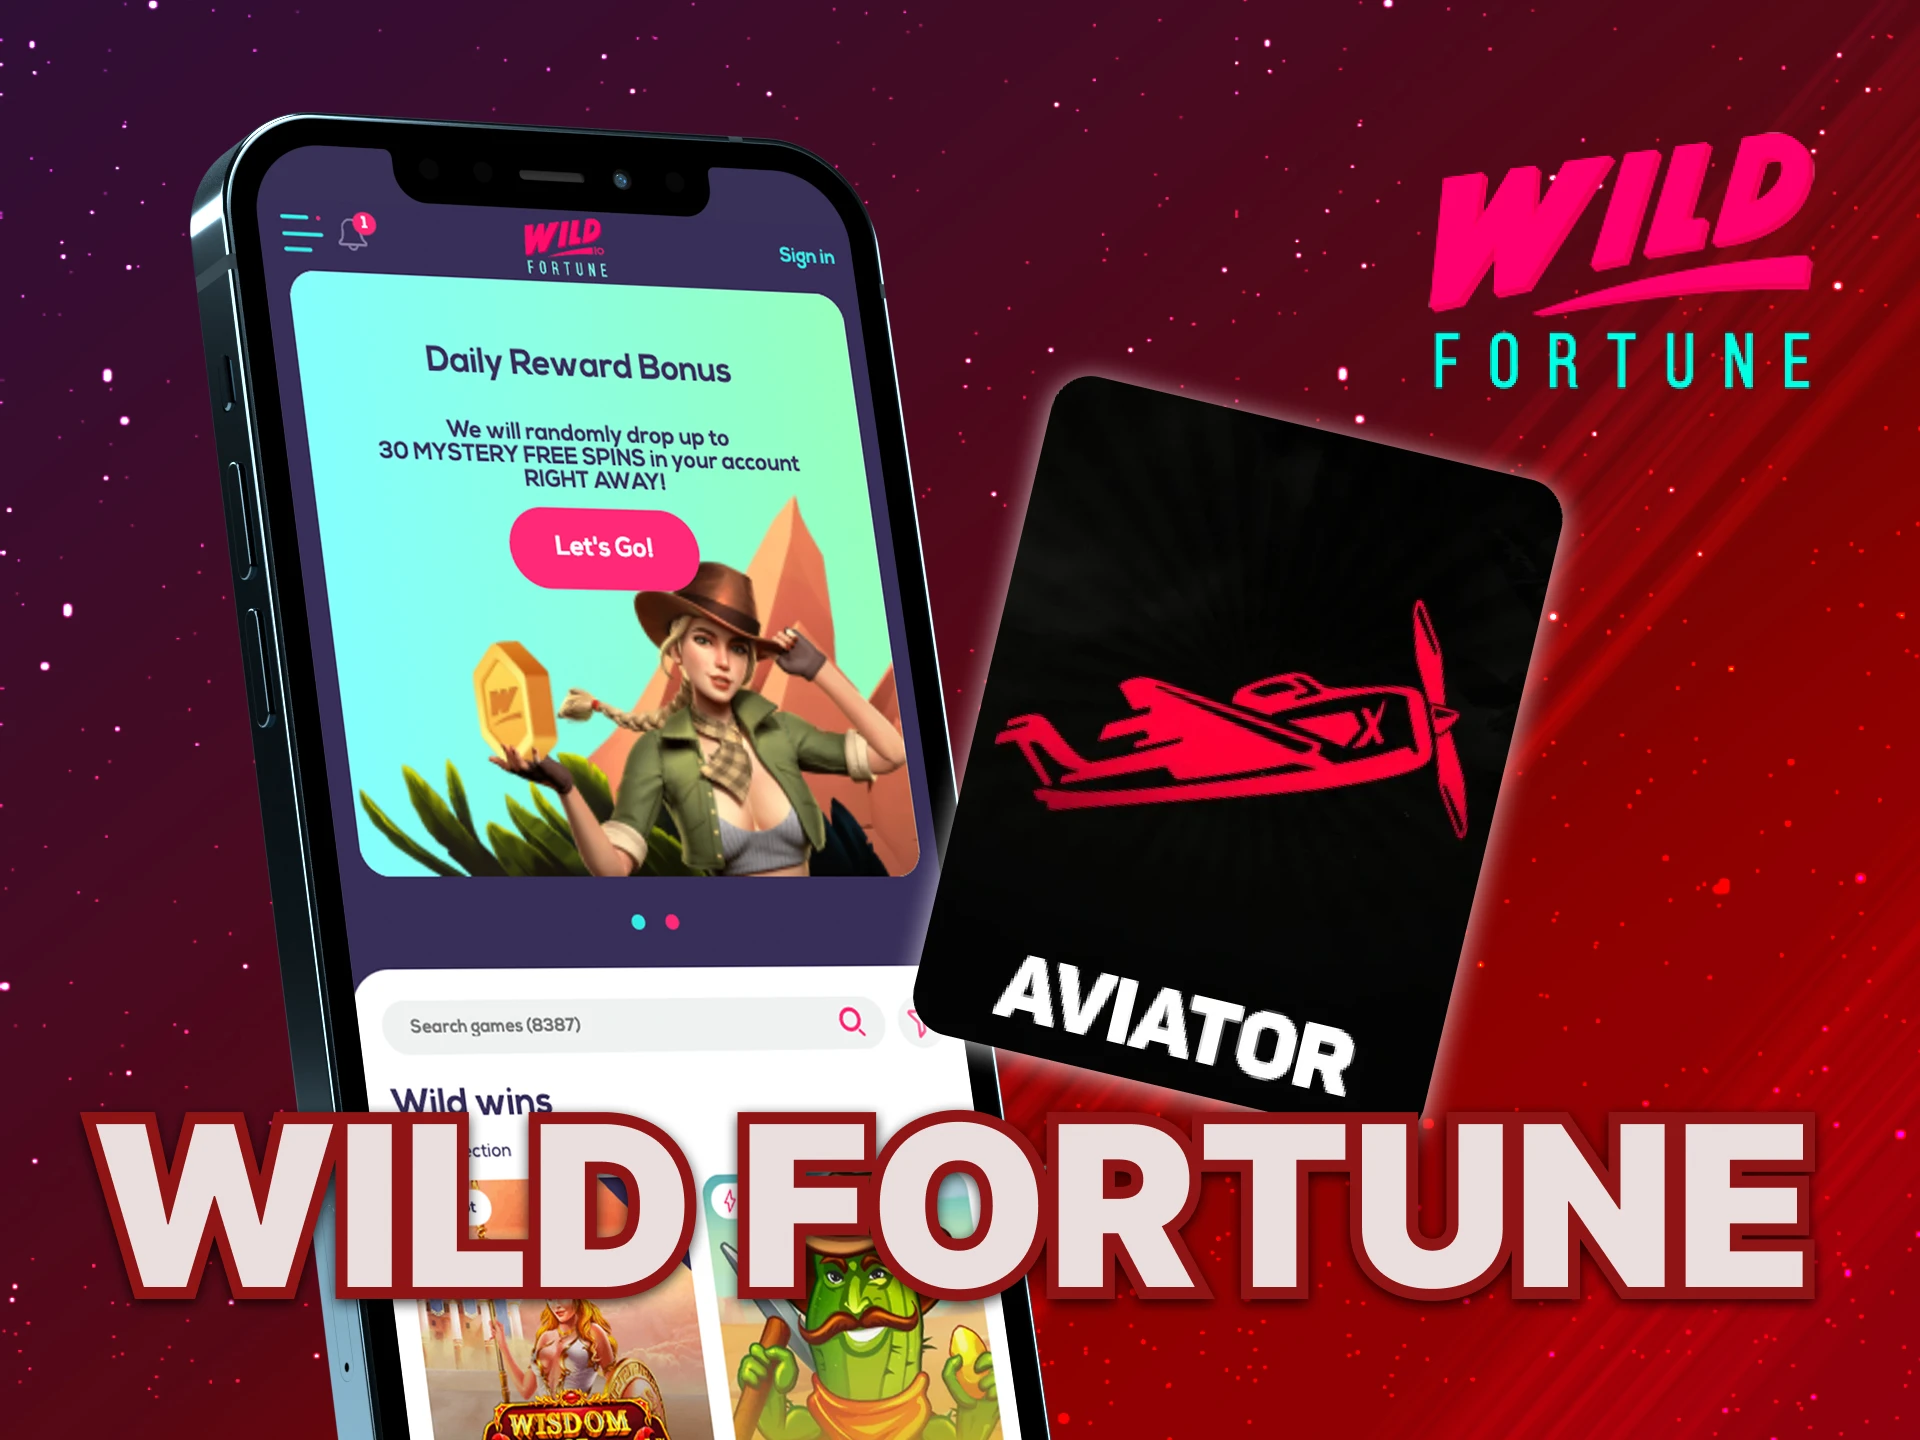 What options are there in the Wild Fortune mobile app.